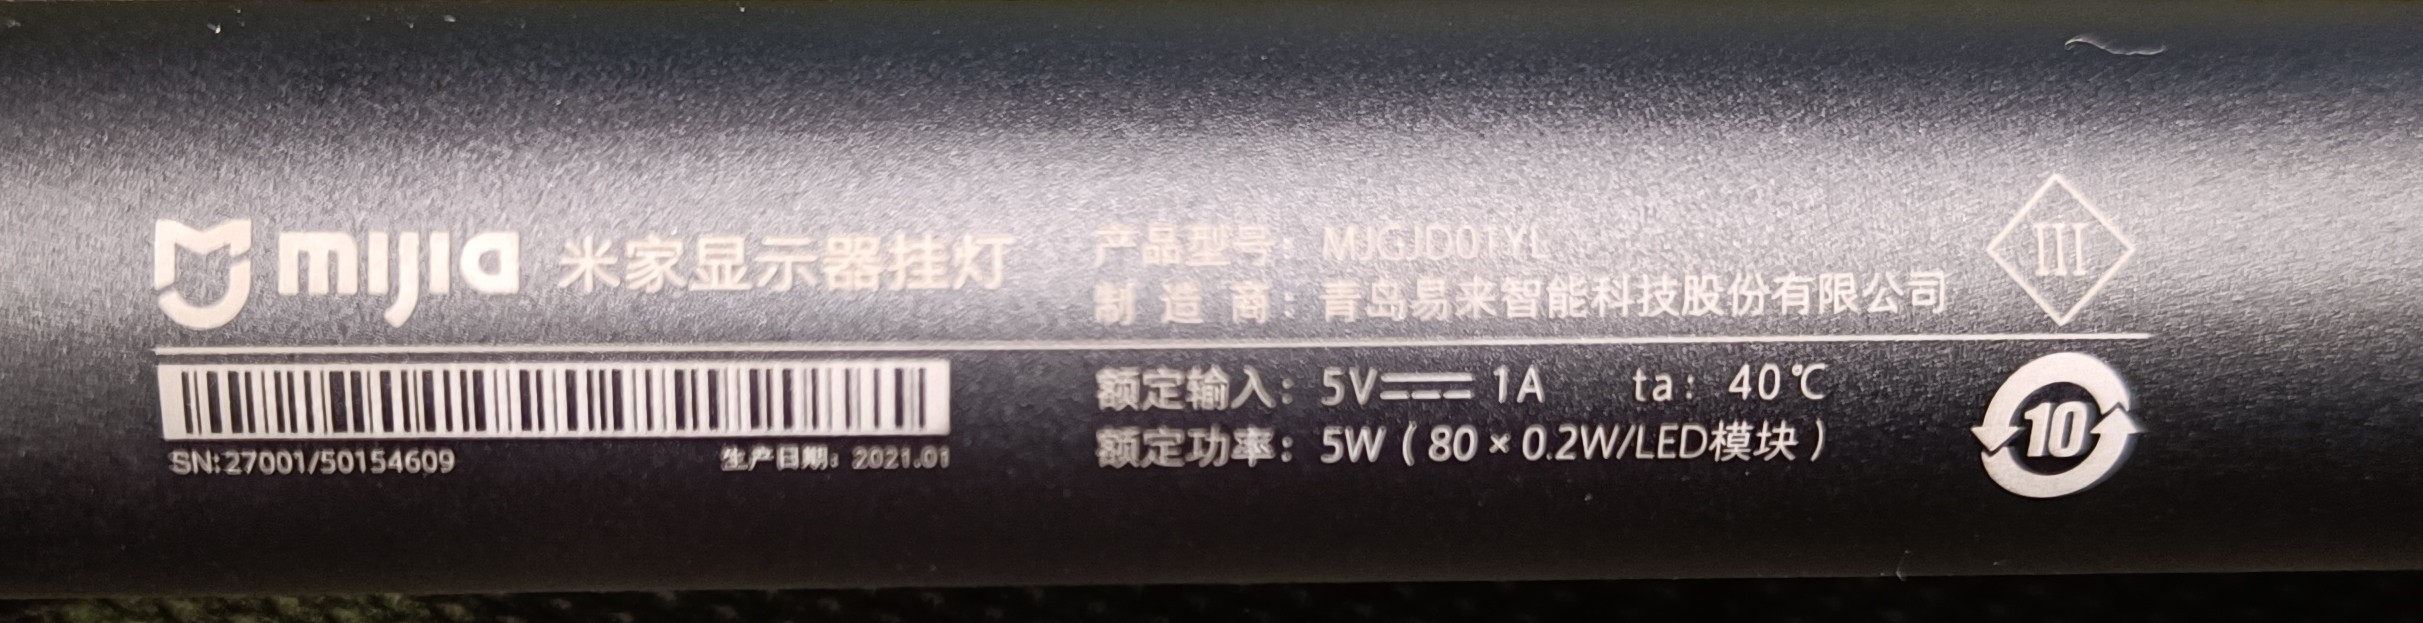 Picture showing product details for MUGJD01YL version of the lamp.